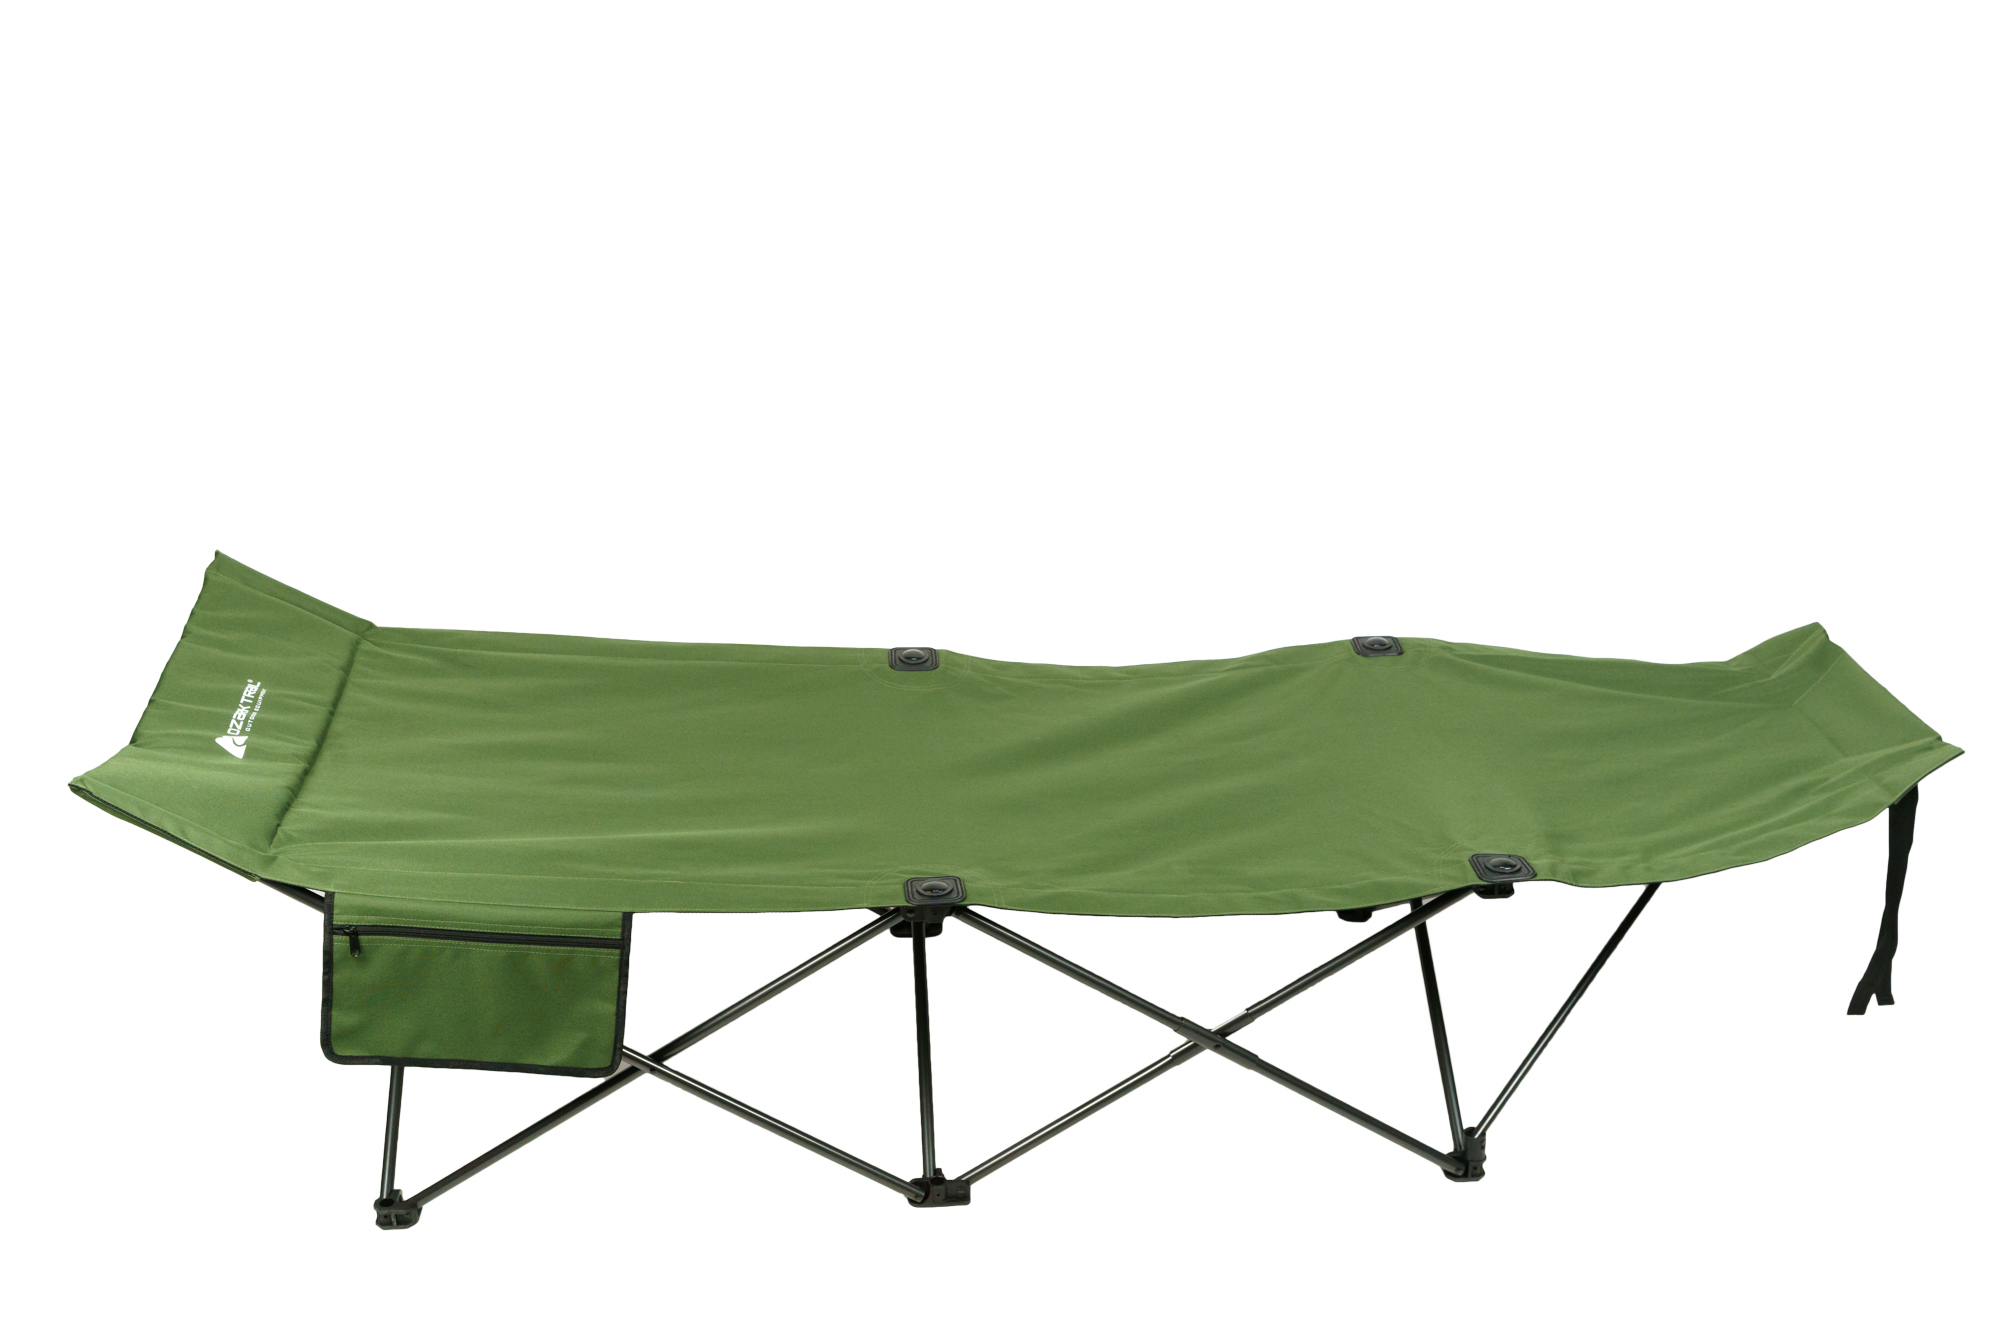 Ozark Trail Adult Camp Cot, Green, 80.2 inches x 30.2 inches x 23.5 inches - image 2 of 16